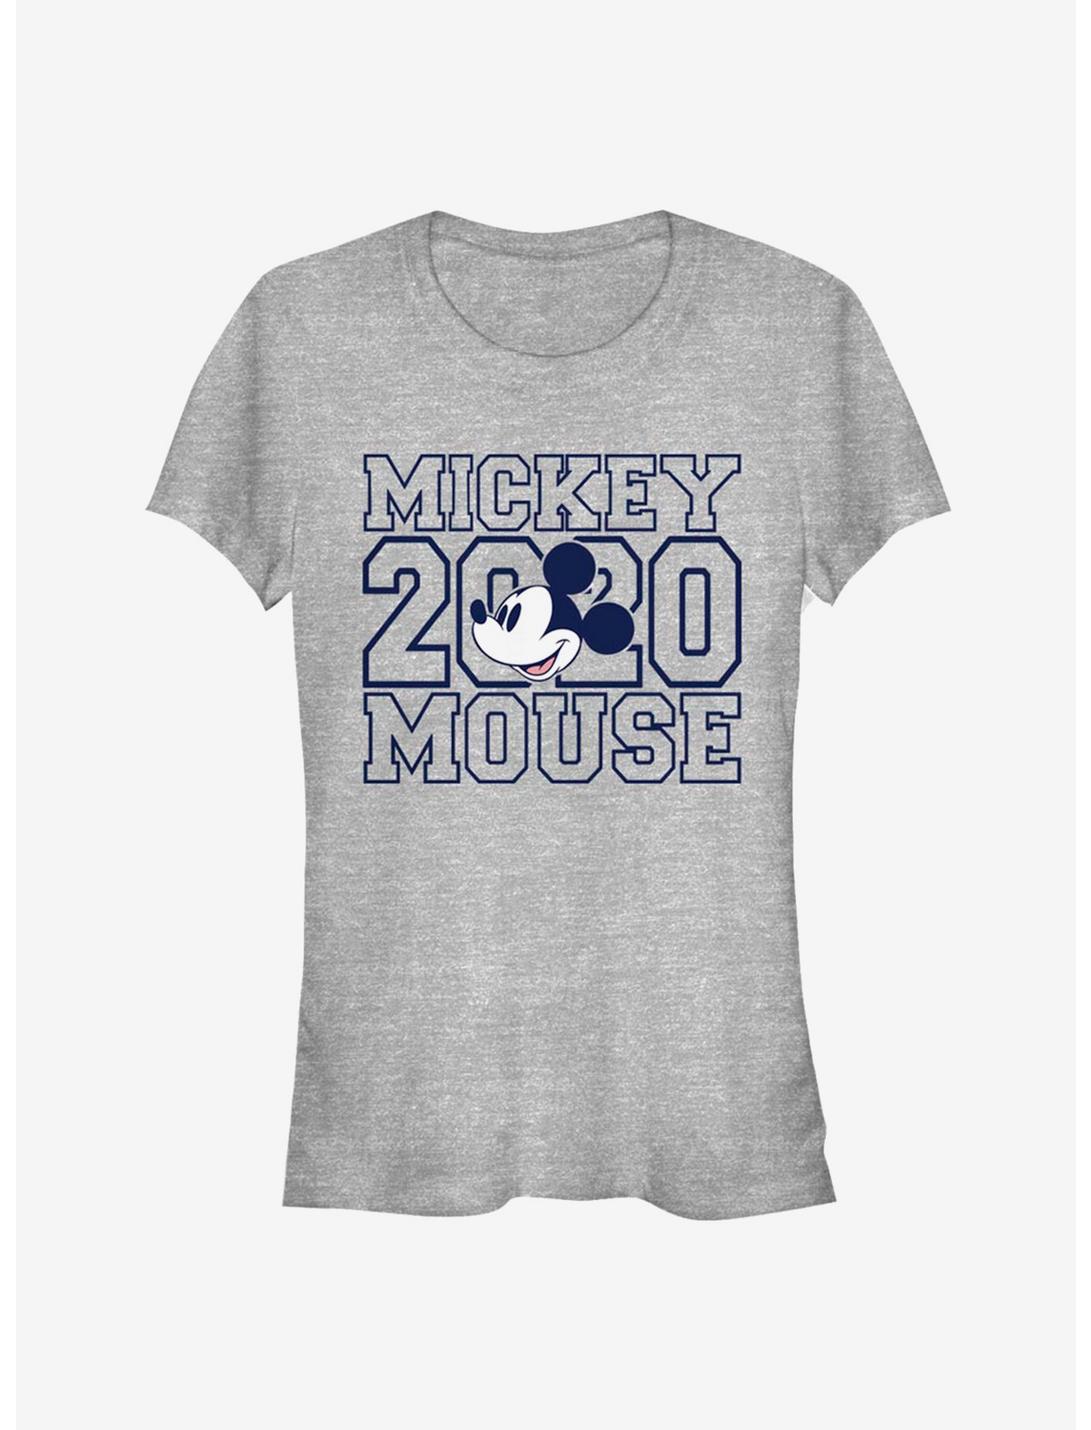 Disney Mickey Mouse 2020 Mouse Classic Girls T-Shirt, ATH HTR, hi-res